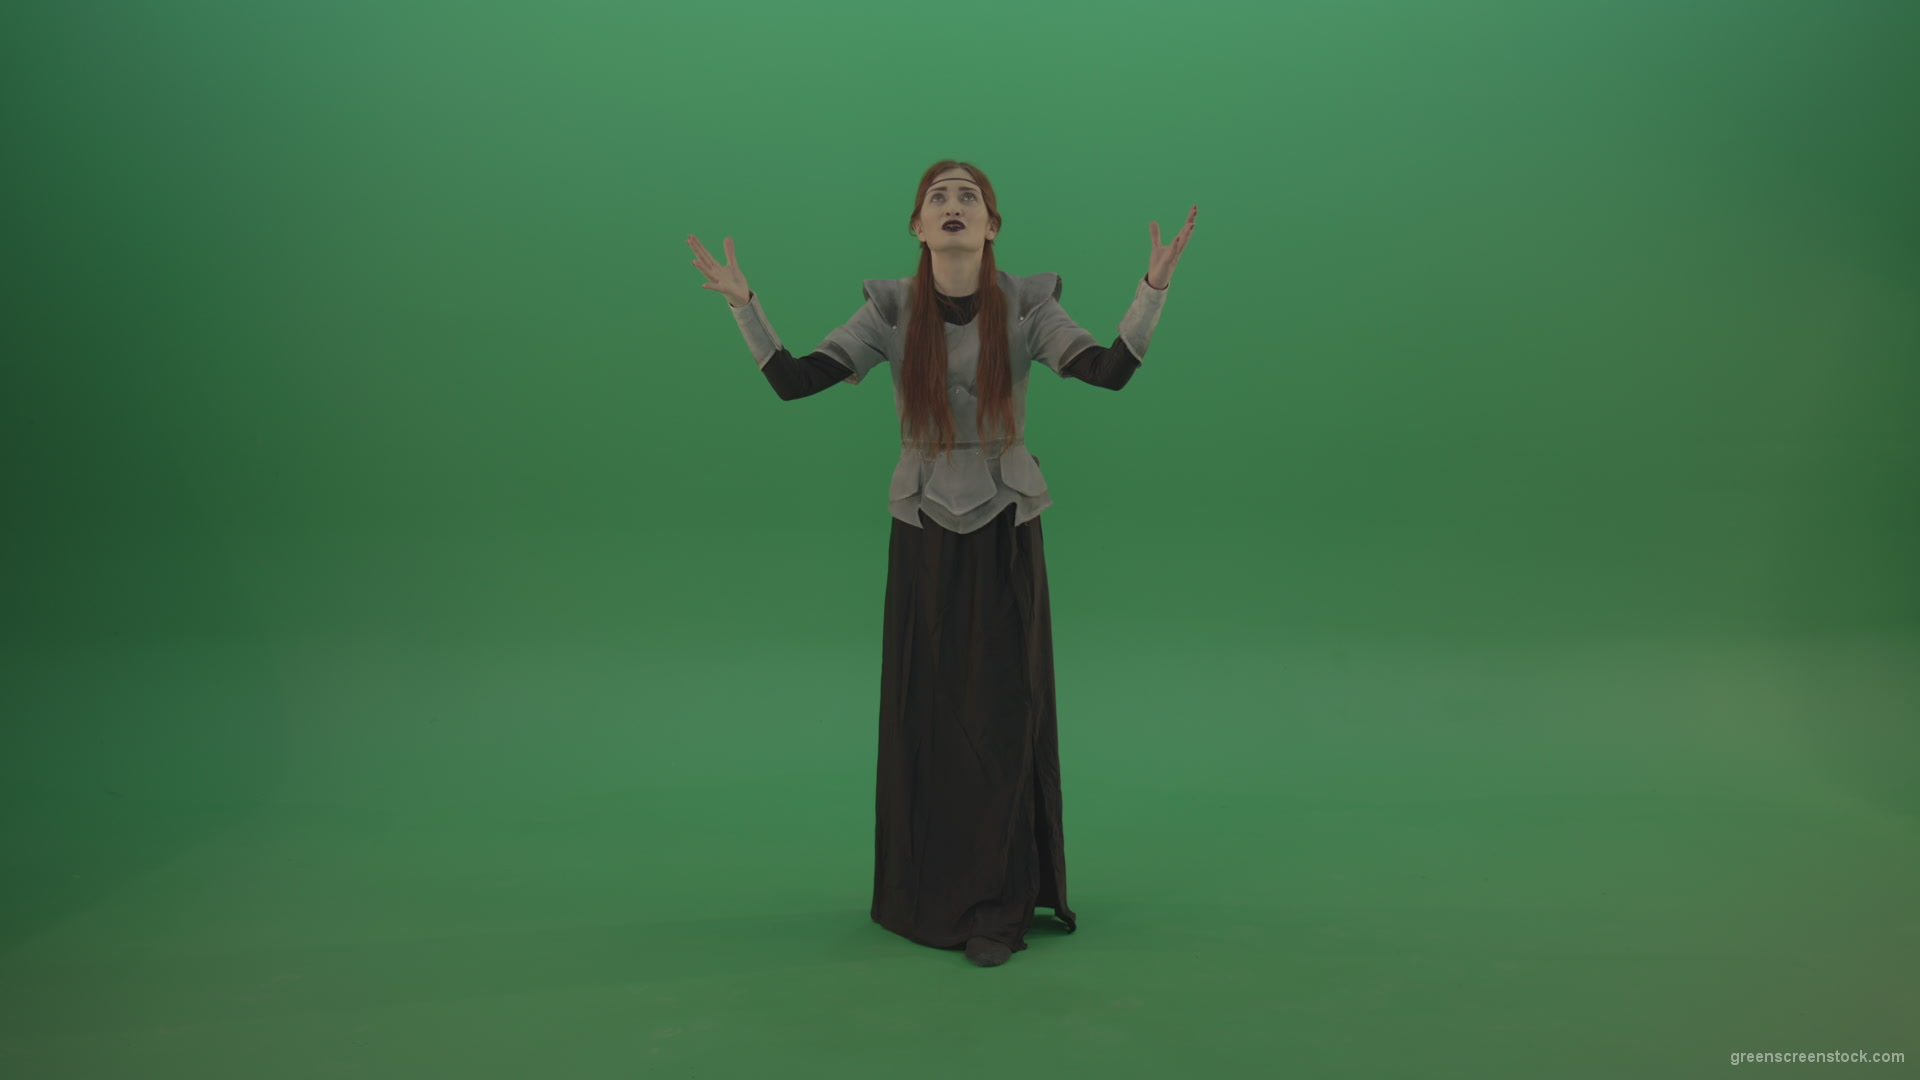 Redheaded-girl-in-full-height-in-medieval-warrior-clothing-asks-for-help-from-the-gods-on-green-screen_007 Green Screen Stock